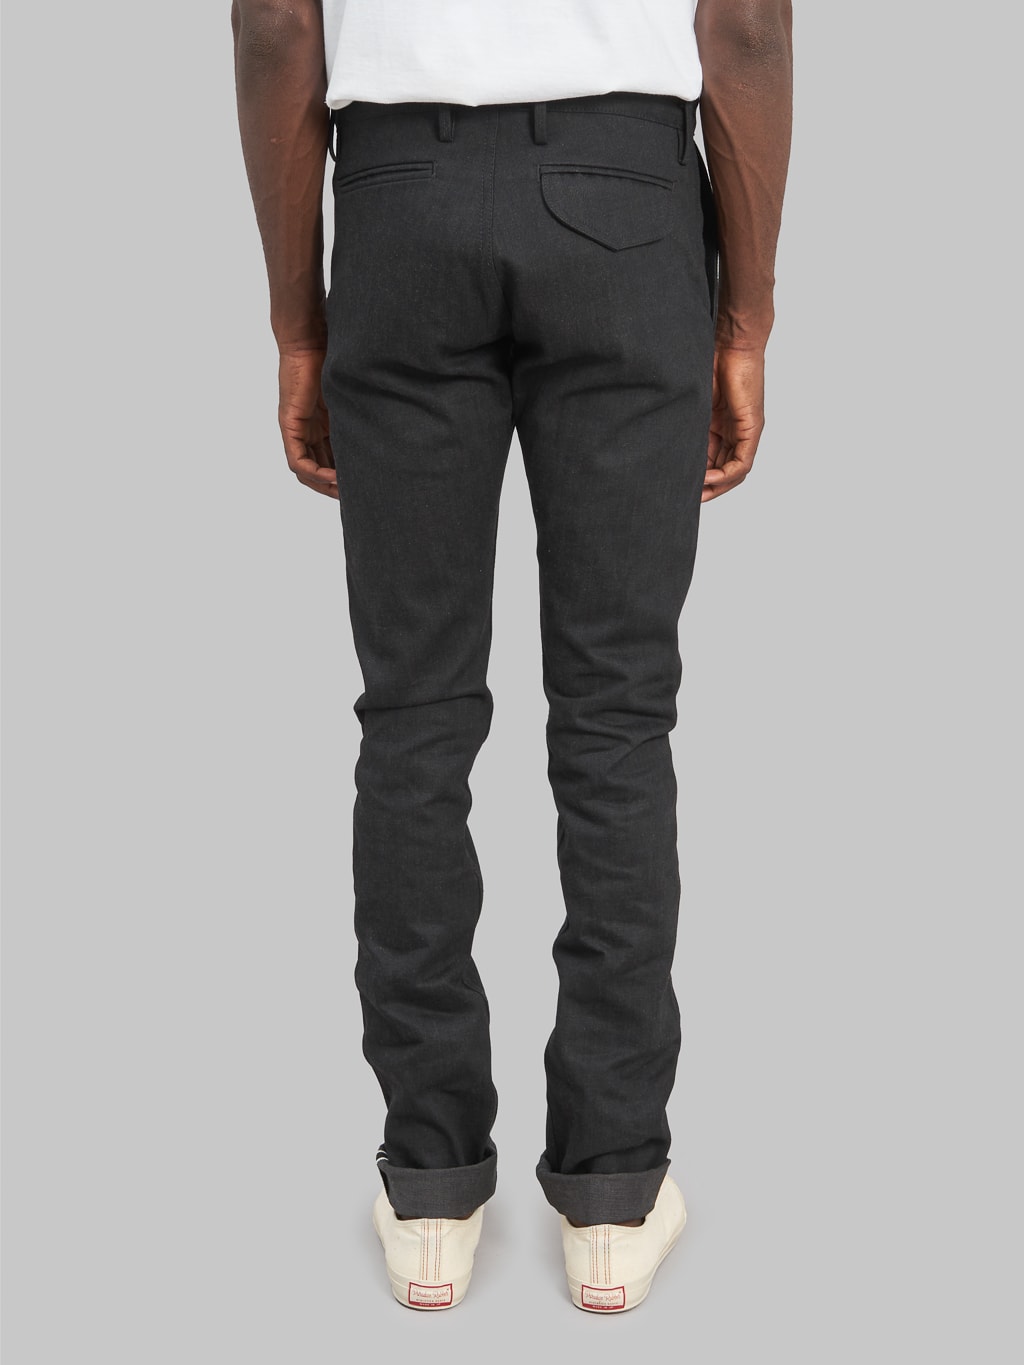 rogue territory 15oz officer trousers stealth slim tapered back fit